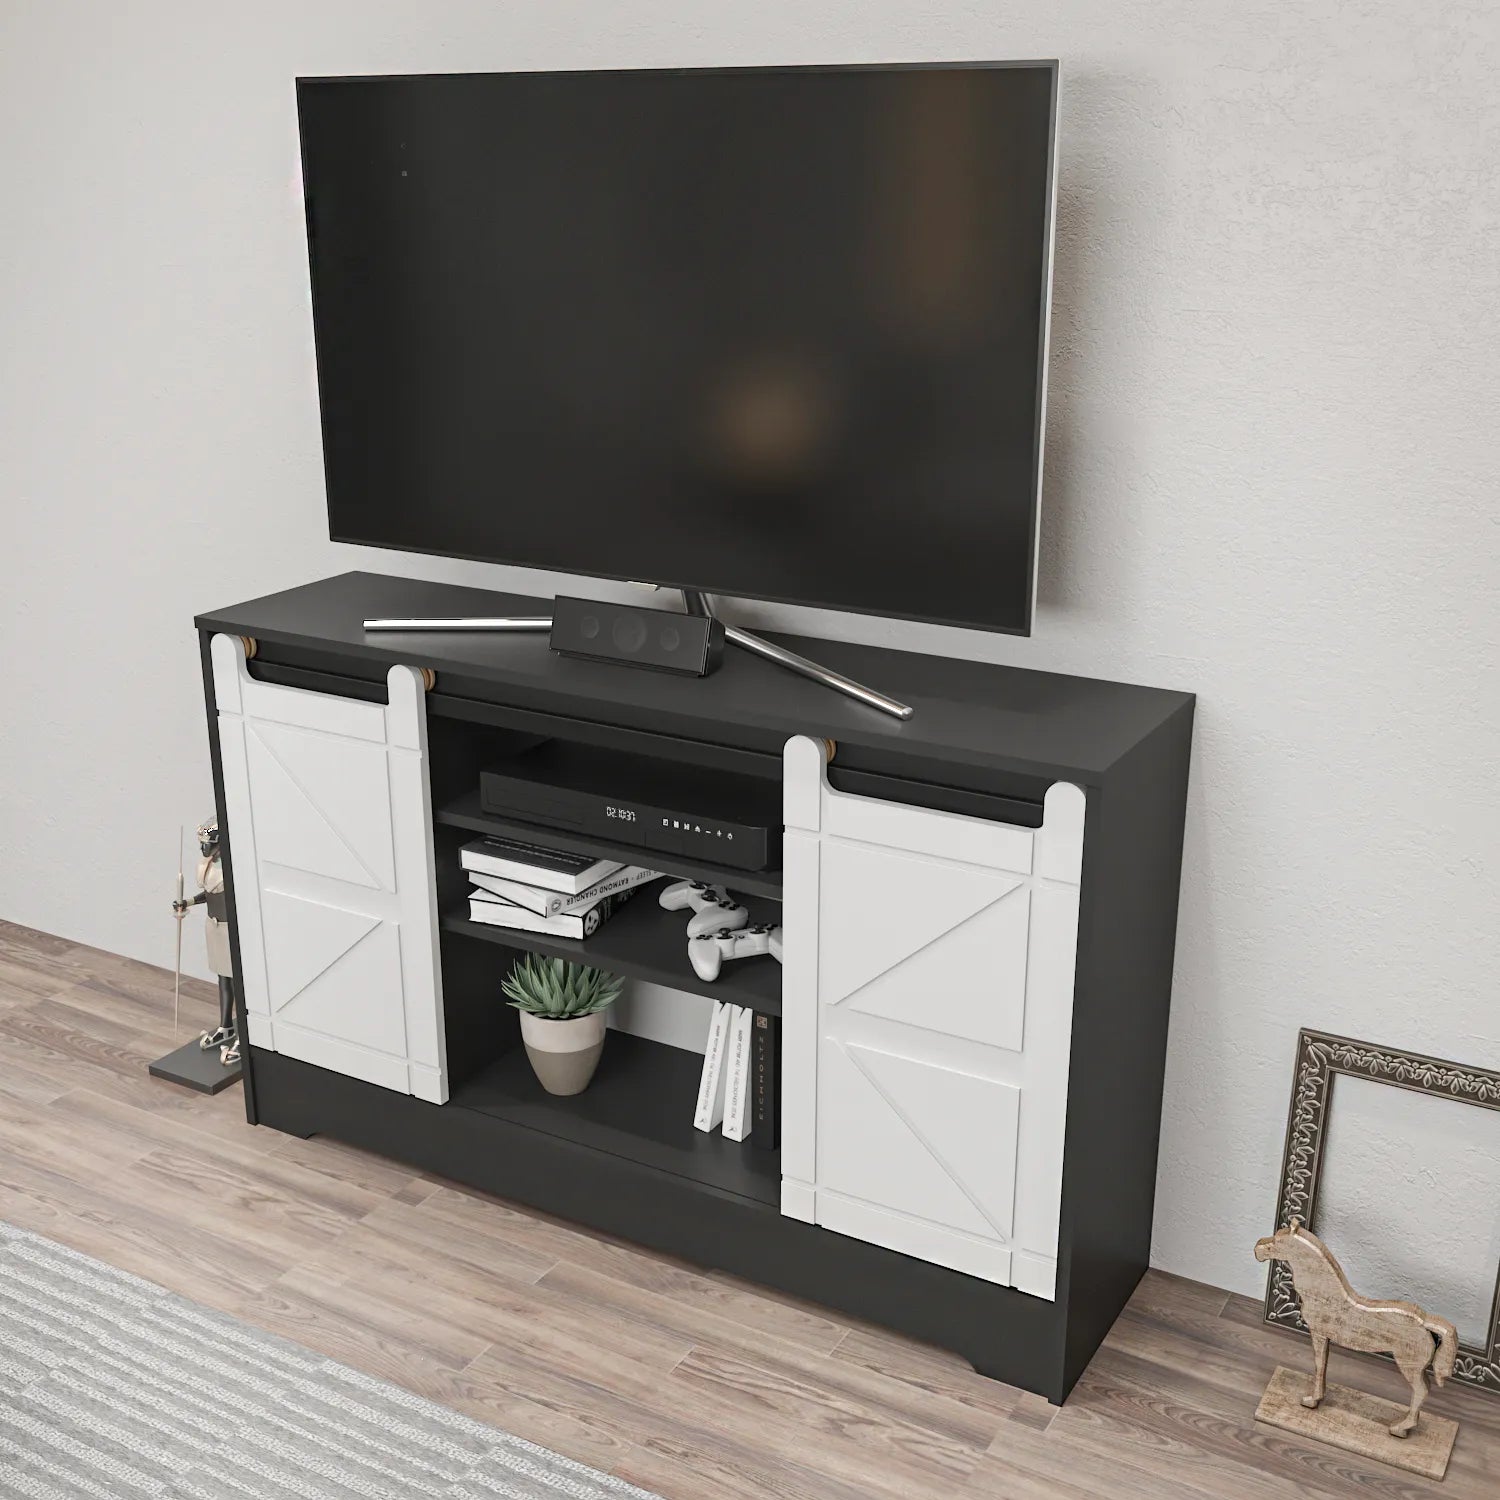 Ahris 55 inch Wide TV Stand Media Console with Sliding Barn Doors for TVs up to 65 inch